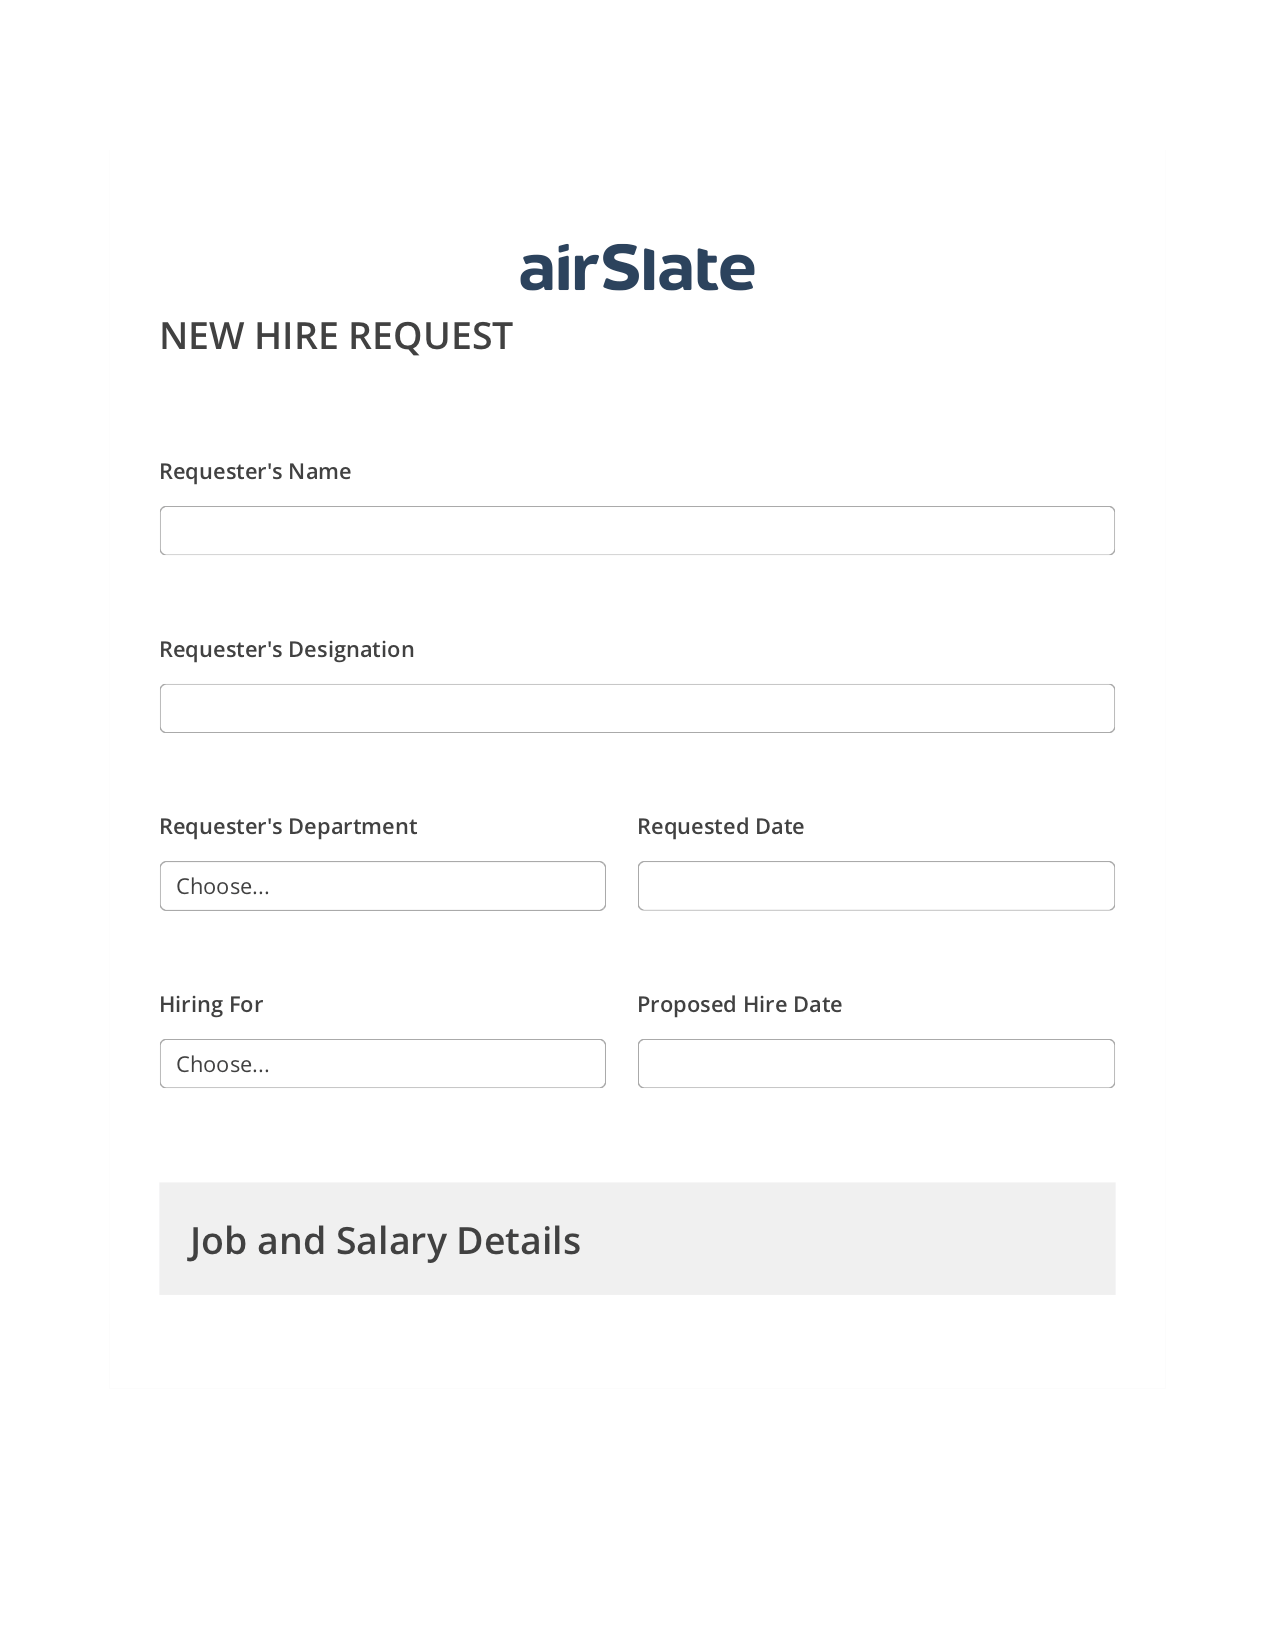 Hiring Request Workflow Pre-fill Dropdowns from Office 365 Excel Bot, Jira Bot, Export to Excel 365 Bot